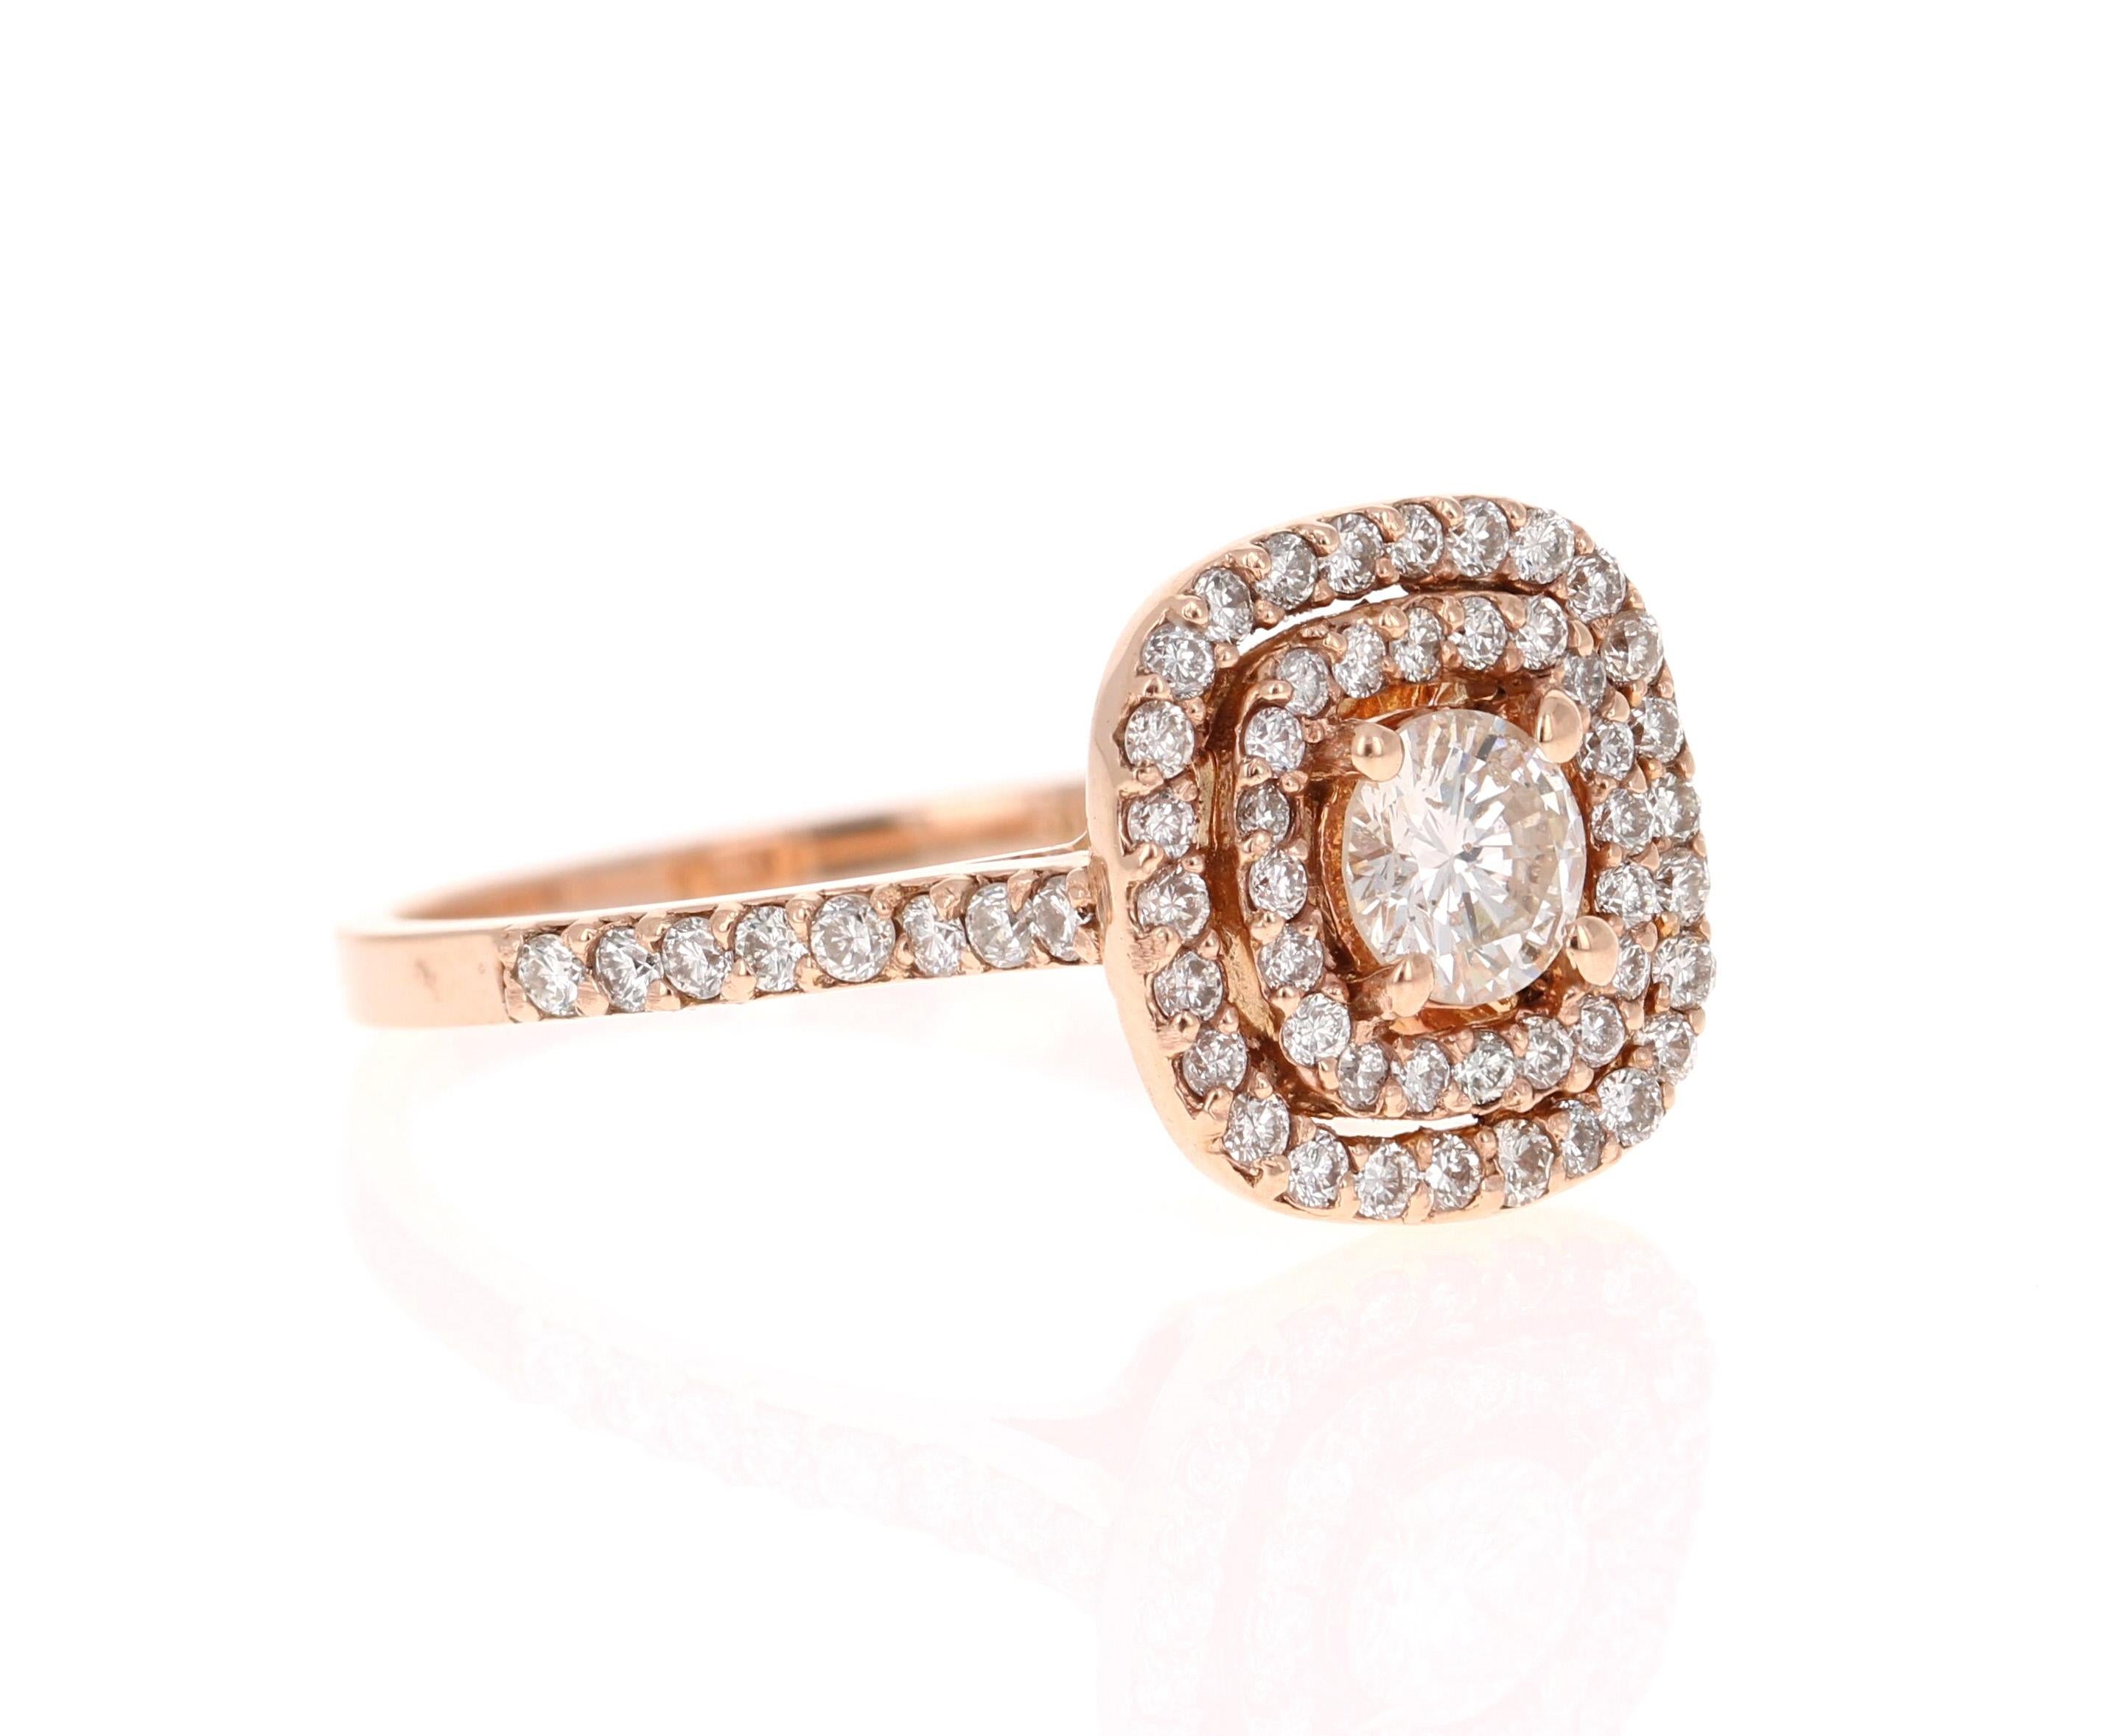 The center round cut diamond weighs 0.43 Carats (Clarity: SI3, Color: I) and is surrounded by 65 round cut diamonds that weigh 0.70 Carats (Clarity: VS, Color: H) The Total Carat Weight of the ring is 1.13 Carats. 

Set in 14 Karat Rose Gold and